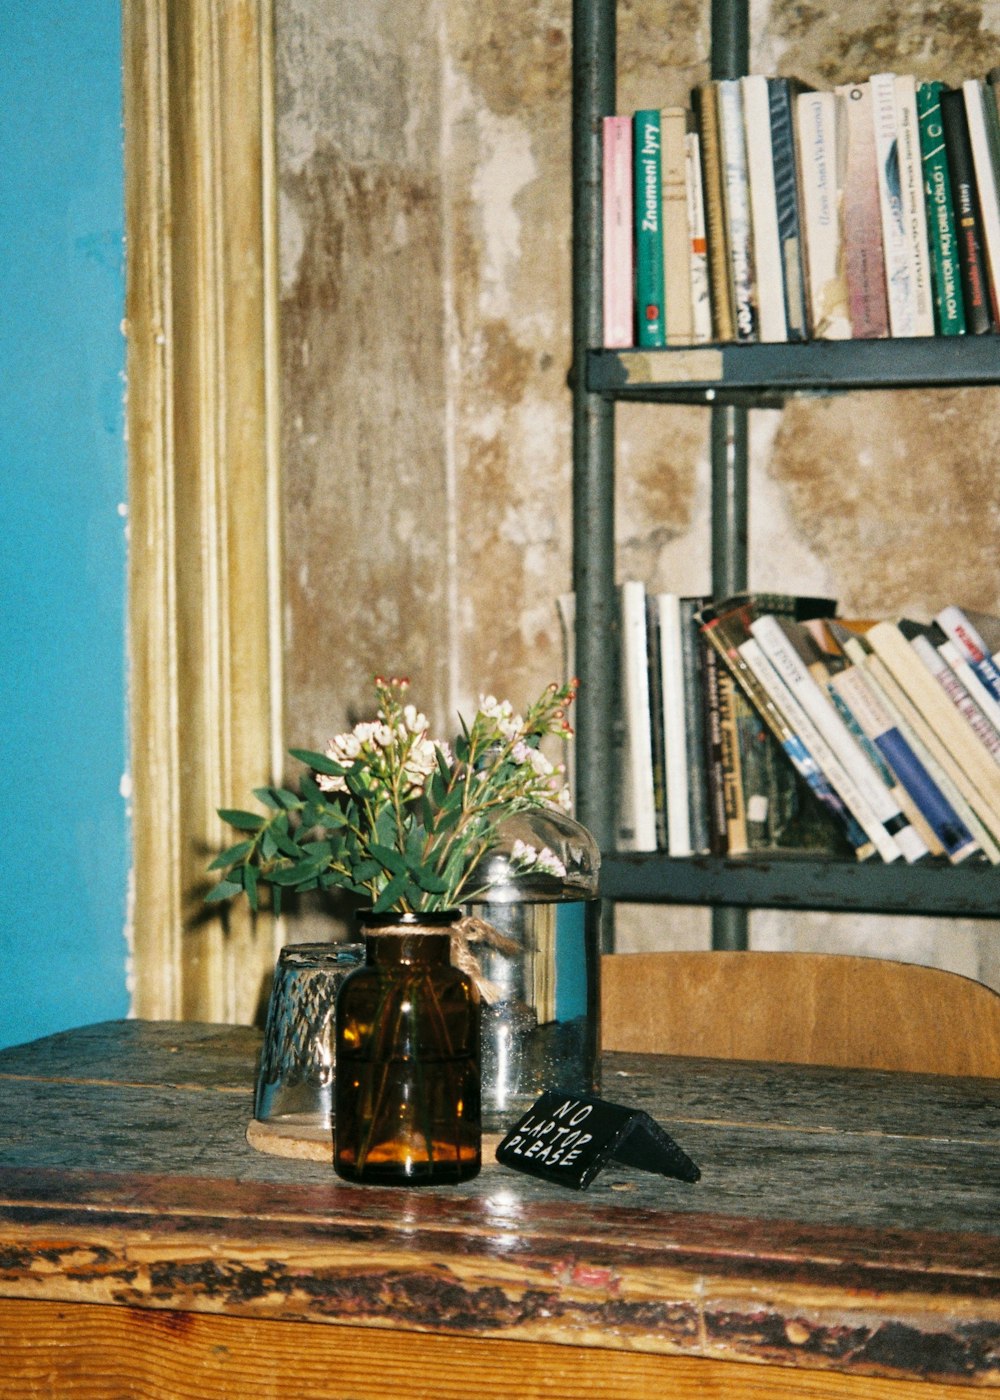 a vase of flowers on a table in front of a bookshelf